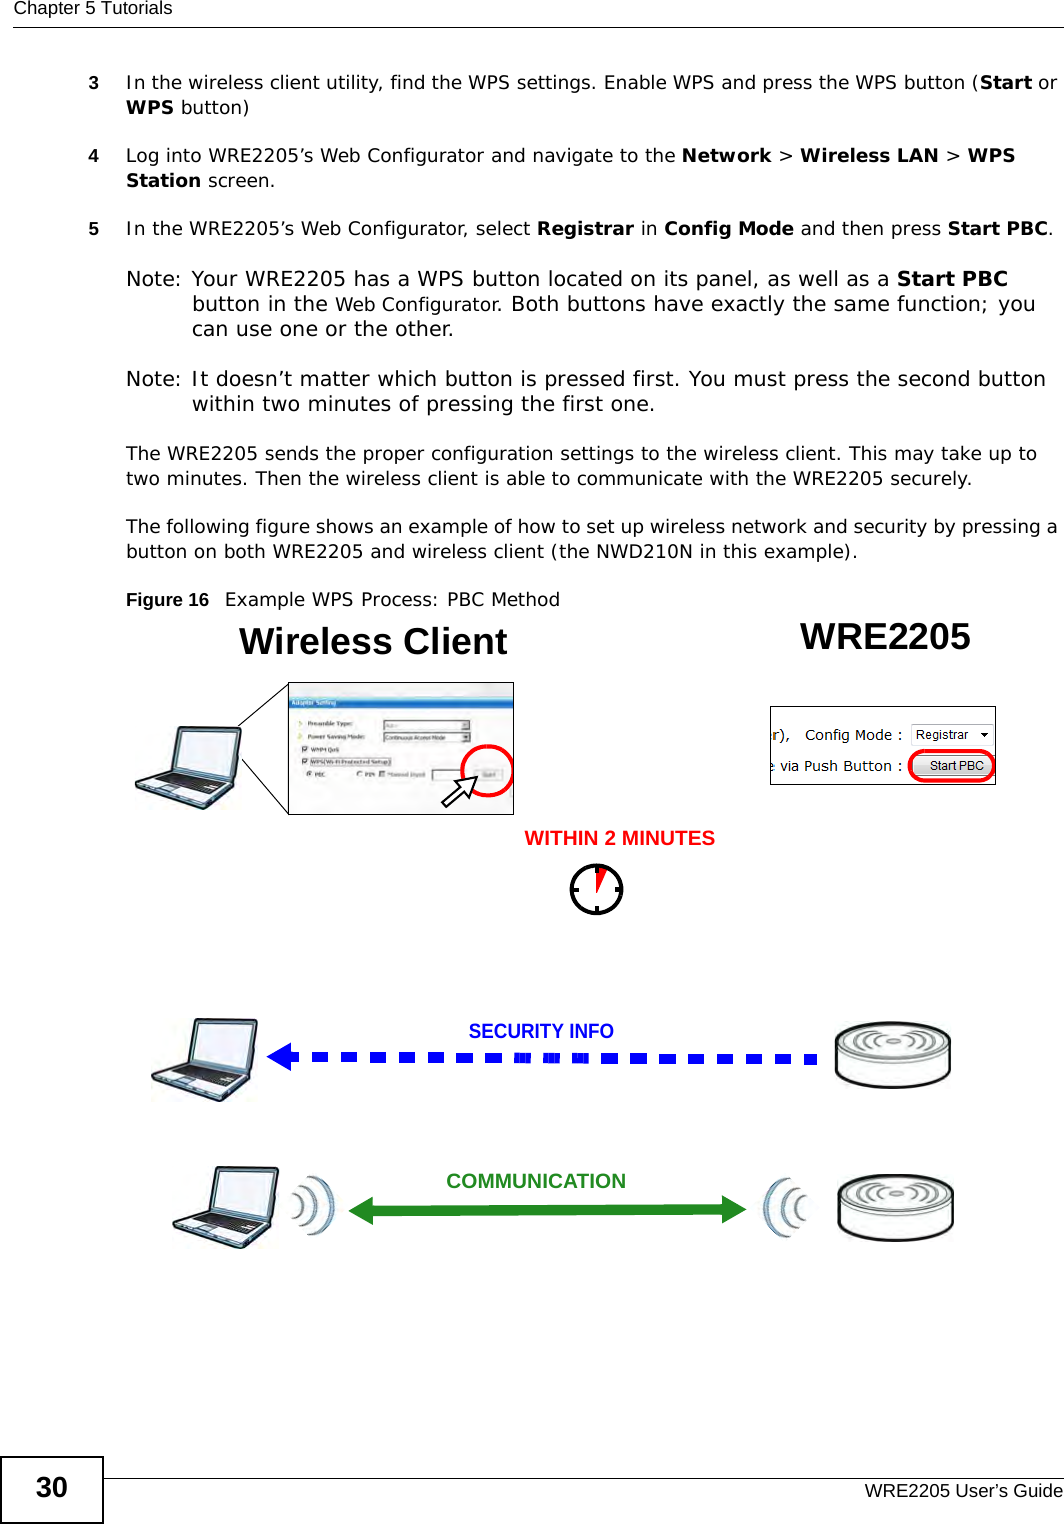 Chapter 5 TutorialsWRE2205 User’s Guide303In the wireless client utility, find the WPS settings. Enable WPS and press the WPS button (Start or WPS button)4Log into WRE2205’s Web Configurator and navigate to the Network &gt; Wireless LAN &gt; WPS Station screen. 5In the WRE2205’s Web Configurator, select Registrar in Config Mode and then press Start PBC.Note: Your WRE2205 has a WPS button located on its panel, as well as a Start PBC button in the Web Configurator. Both buttons have exactly the same function; you can use one or the other.Note: It doesn’t matter which button is pressed first. You must press the second button within two minutes of pressing the first one. The WRE2205 sends the proper configuration settings to the wireless client. This may take up to two minutes. Then the wireless client is able to communicate with the WRE2205 securely. The following figure shows an example of how to set up wireless network and security by pressing a button on both WRE2205 and wireless client (the NWD210N in this example).Figure 16   Example WPS Process: PBC MethodWireless Client WRE2205SECURITY INFOCOMMUNICATIONWITHIN 2 MINUTES